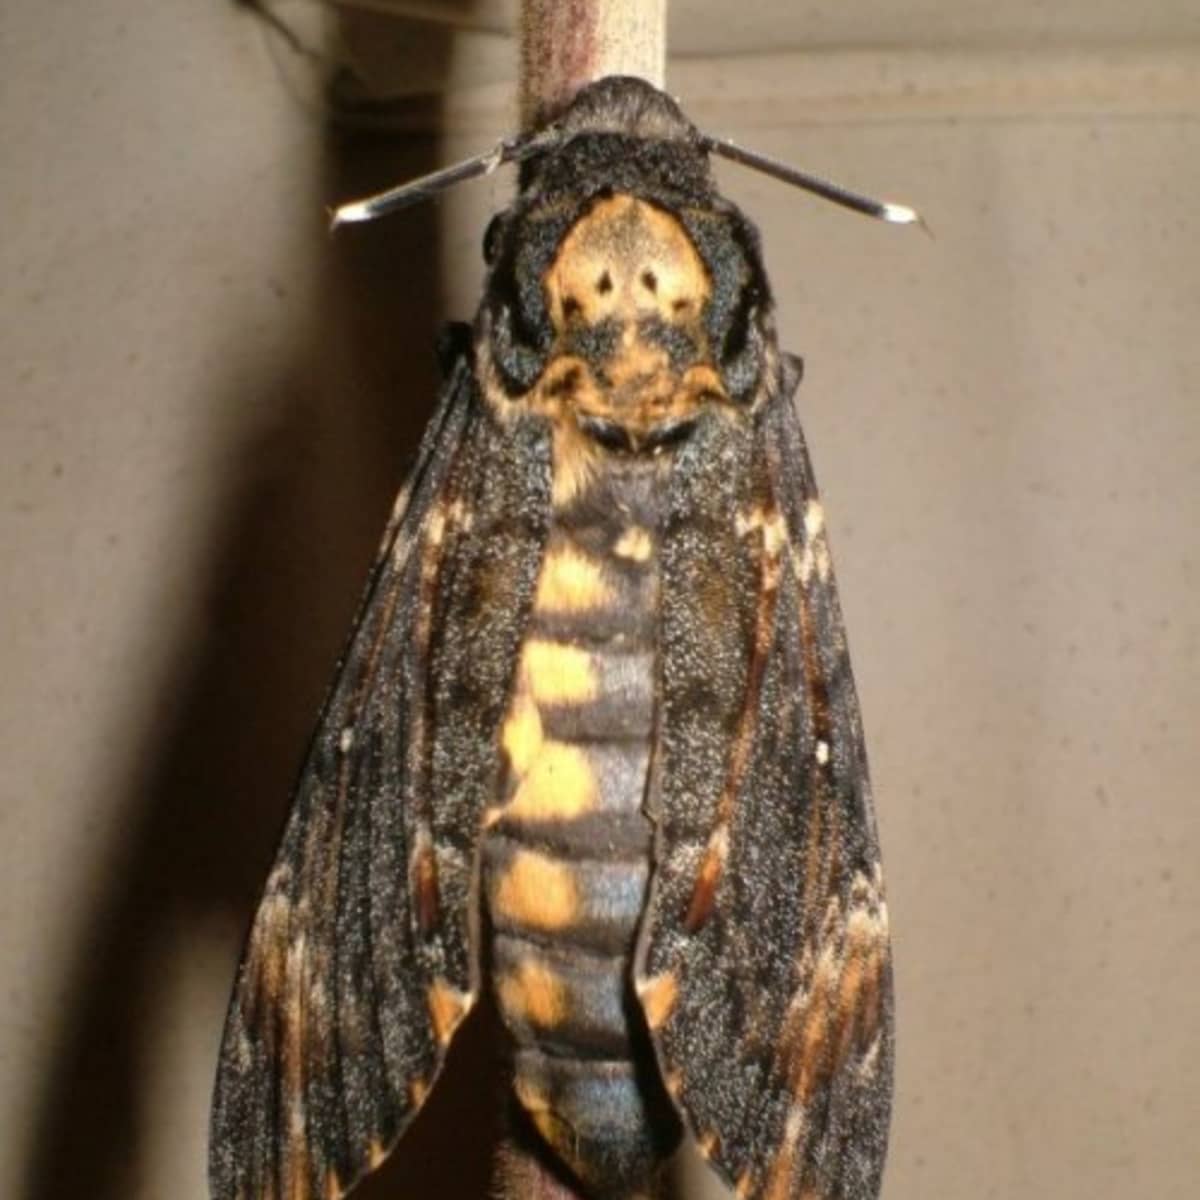 Convolvulus Hawk Moth– Identification, Life Cycle, Facts & Pictures